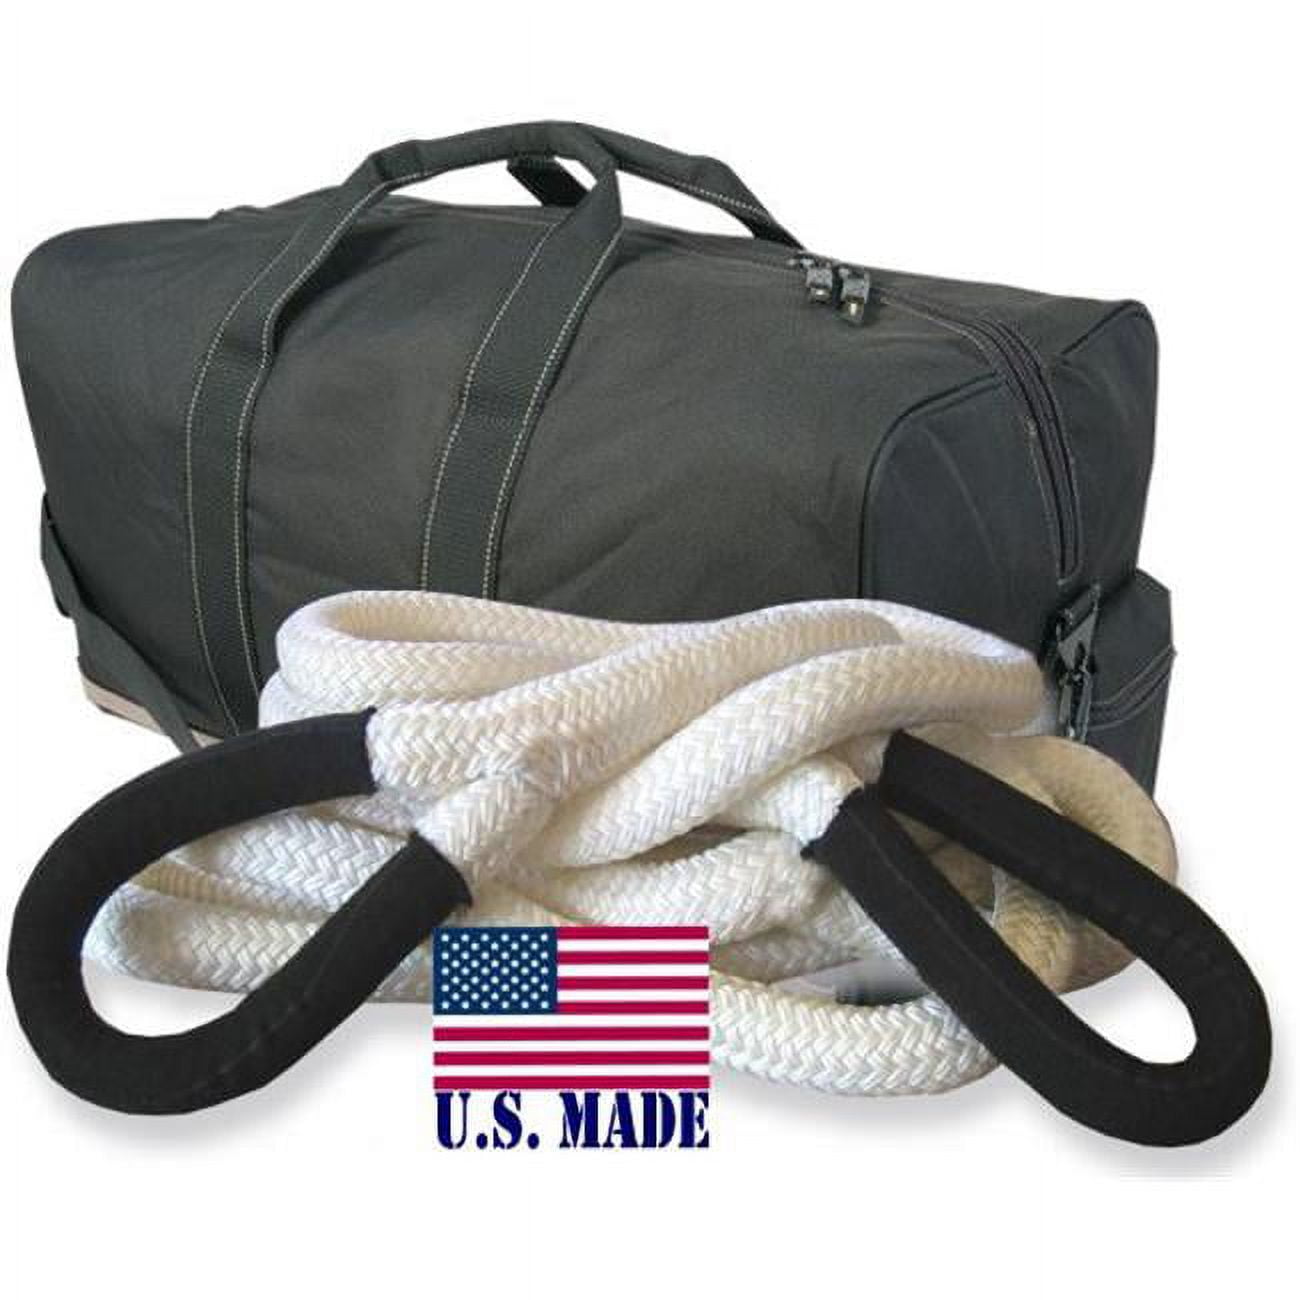 U.s. Made Kinetic Recovery Rope (mega) - 1-1/4 Inch X 30 Ft (snatch Rope) With Heavy-duty Carry Bag (4x4 Vehicle Recovery)